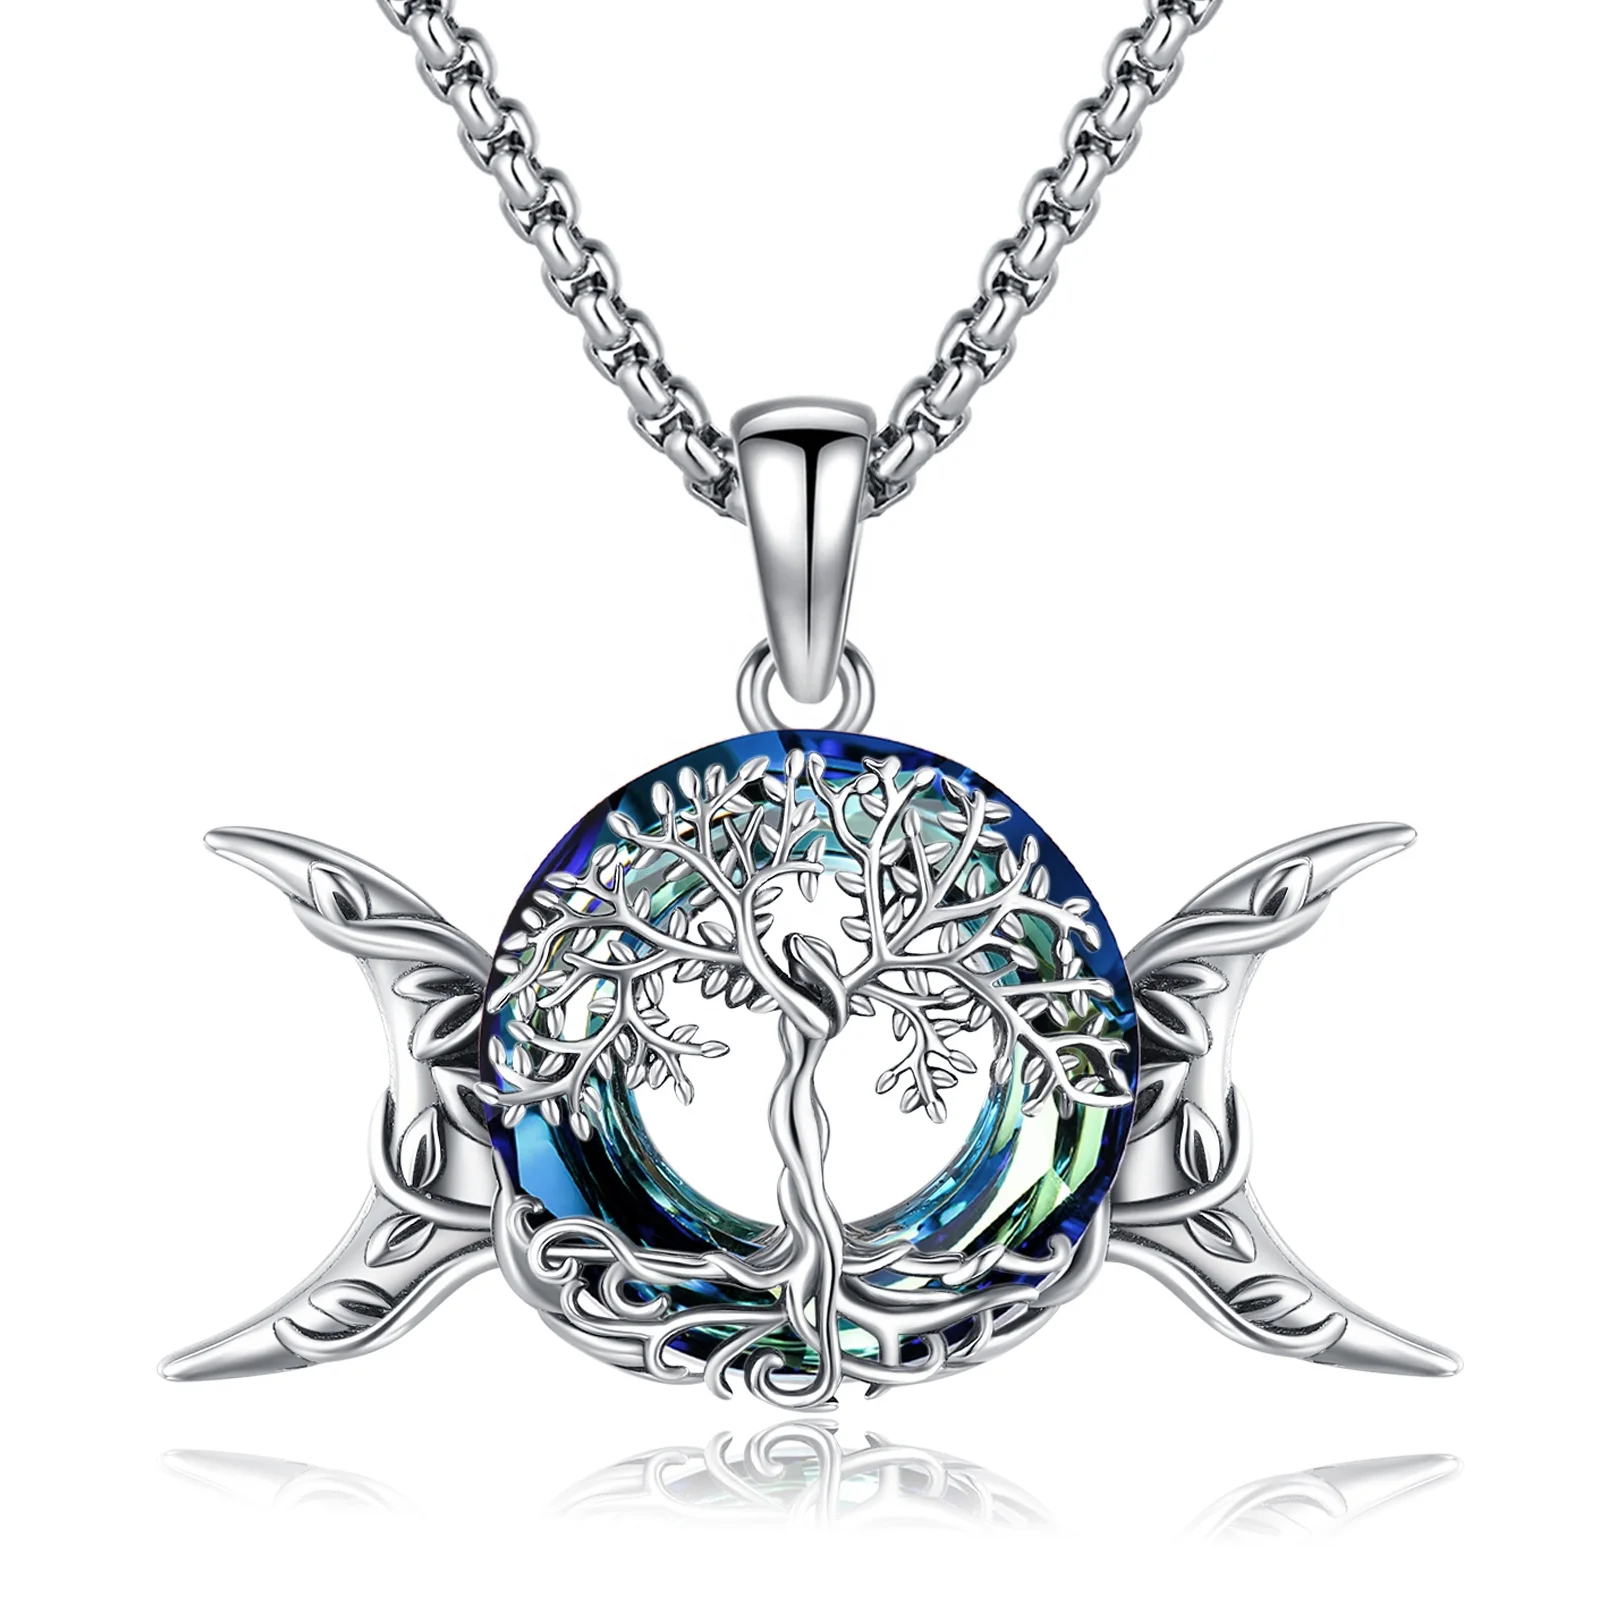 

Wholesale Piece 925 Sterling Silver Jewelry Triple Moon Goddess Pendant Necklaces with Austrian Crystal